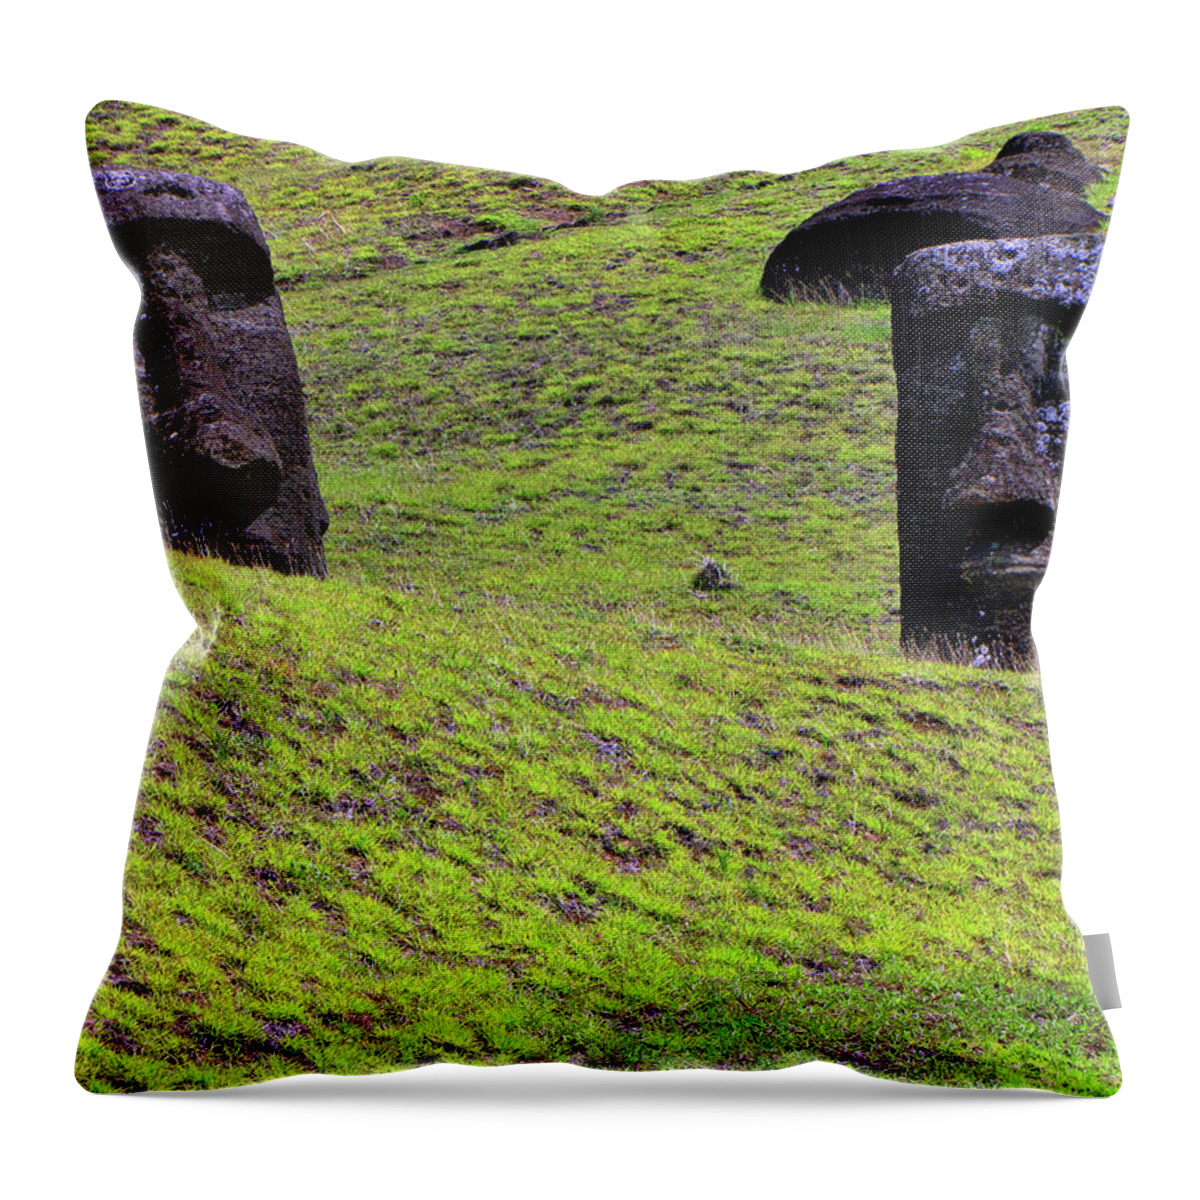 Easter Island Chile Throw Pillow featuring the photograph Easter Island Chile #40 by Paul James Bannerman